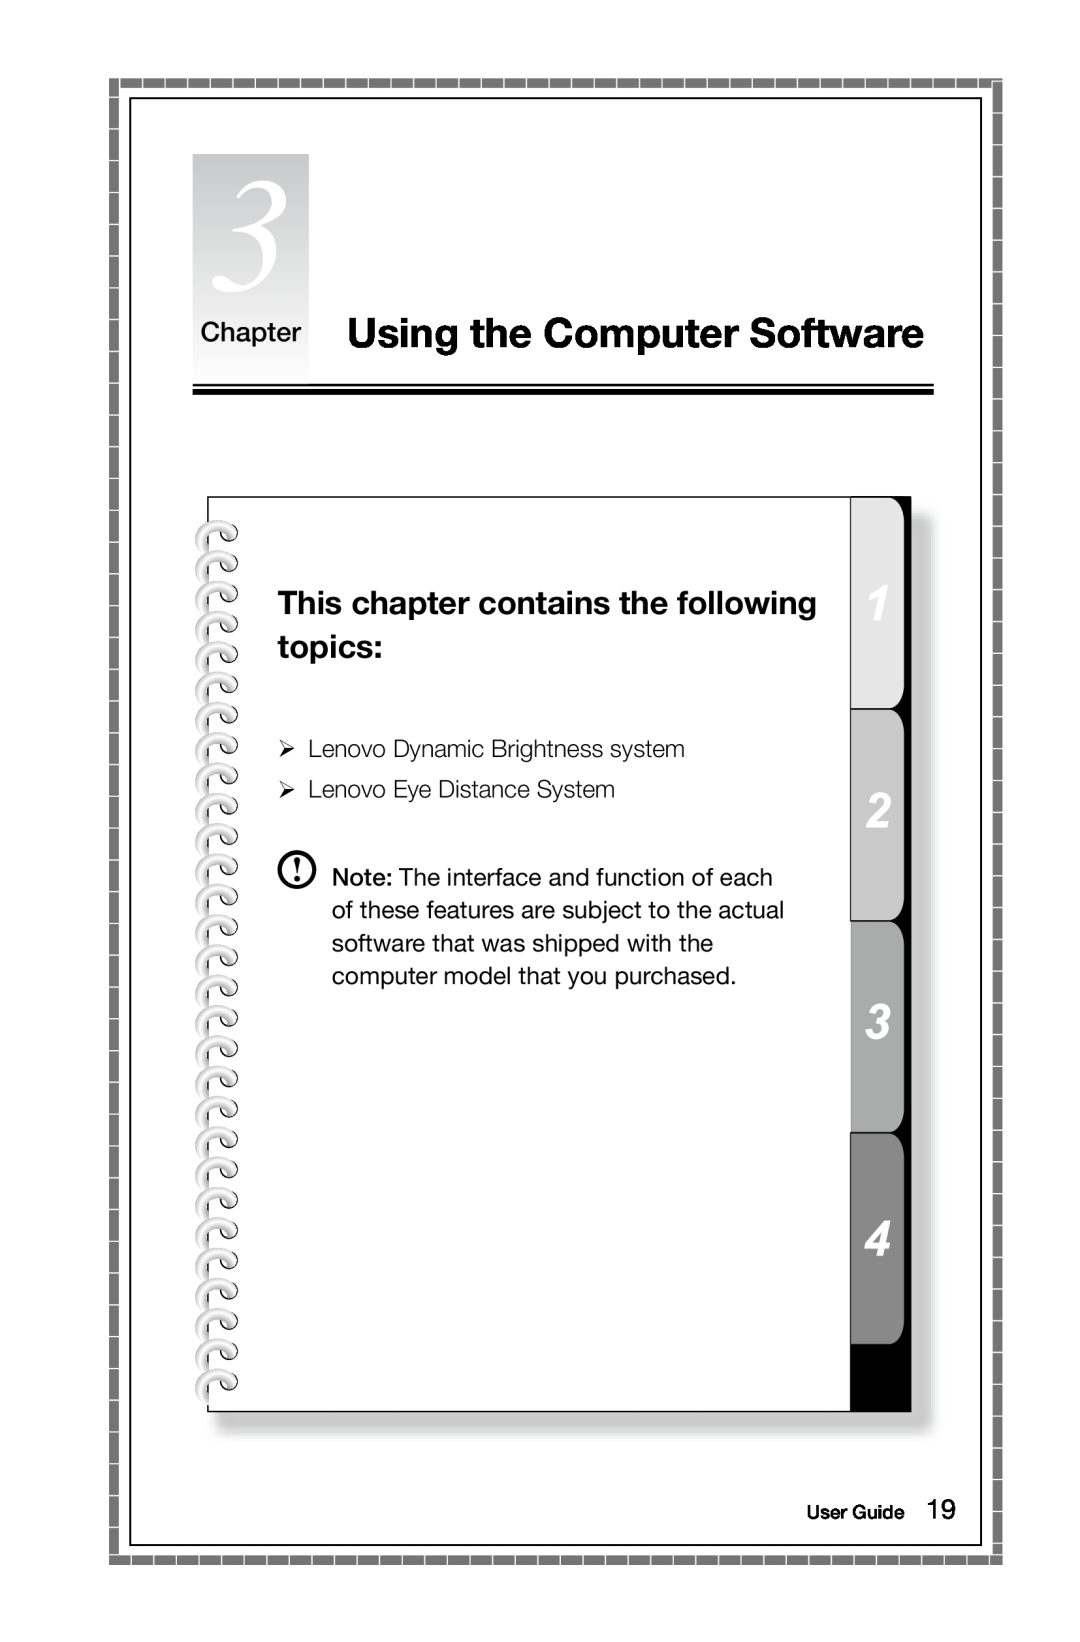 Lenovo 10091/2558/1196 manual Chapter Using the Computer Software, This chapter contains the following topics, User Guide 